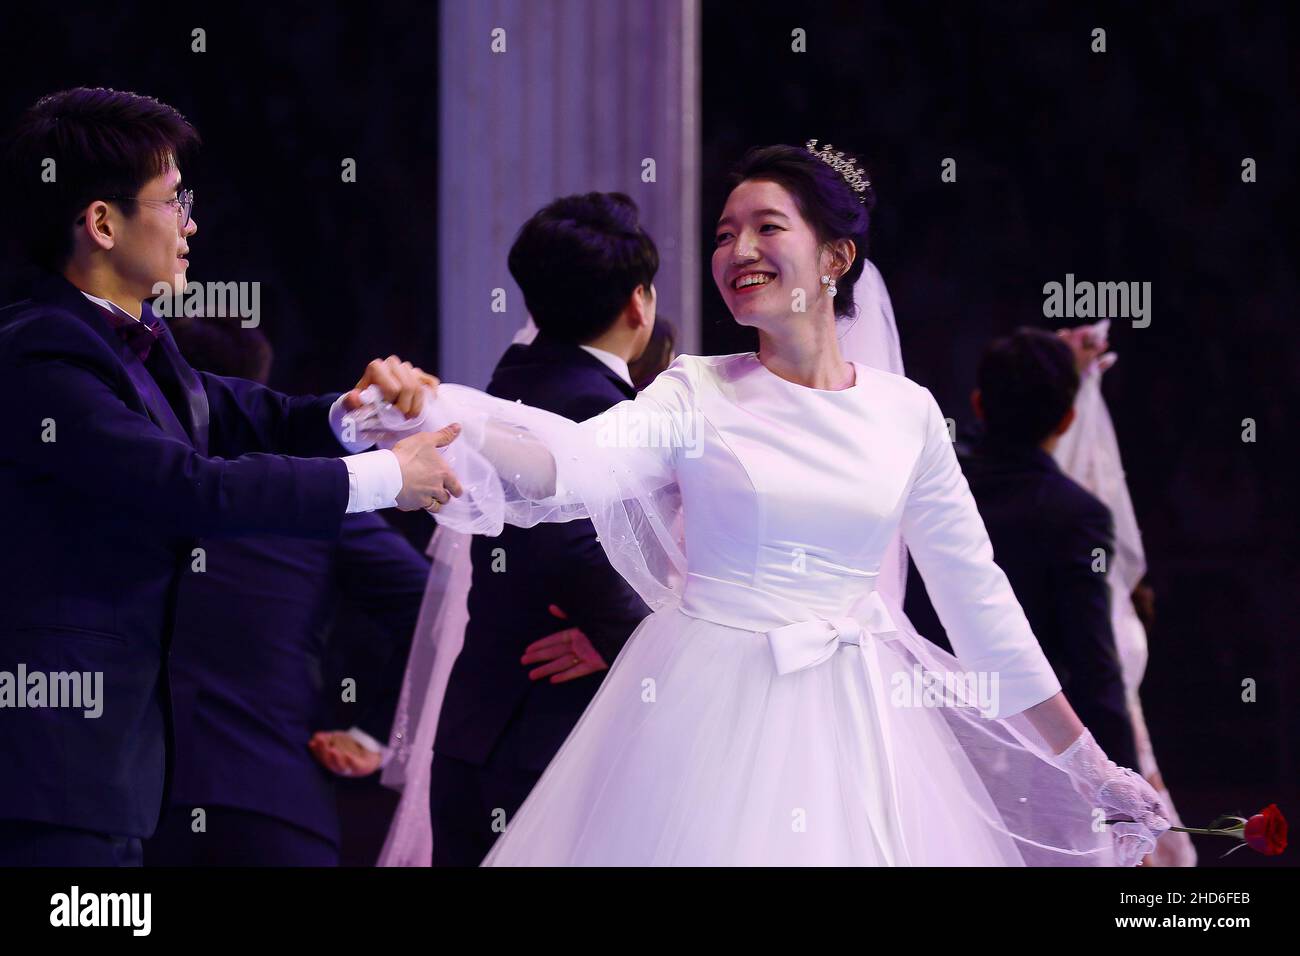 Feb 07, 2020-Gapyeong, South Korea-A Couple take part in a mass wedding of the Family Federation for World Peace and Unification, commonly known as the Unification Church, at Cheongshim Peace World Center in Gapyeong-gun, South Korea. Stock Photo